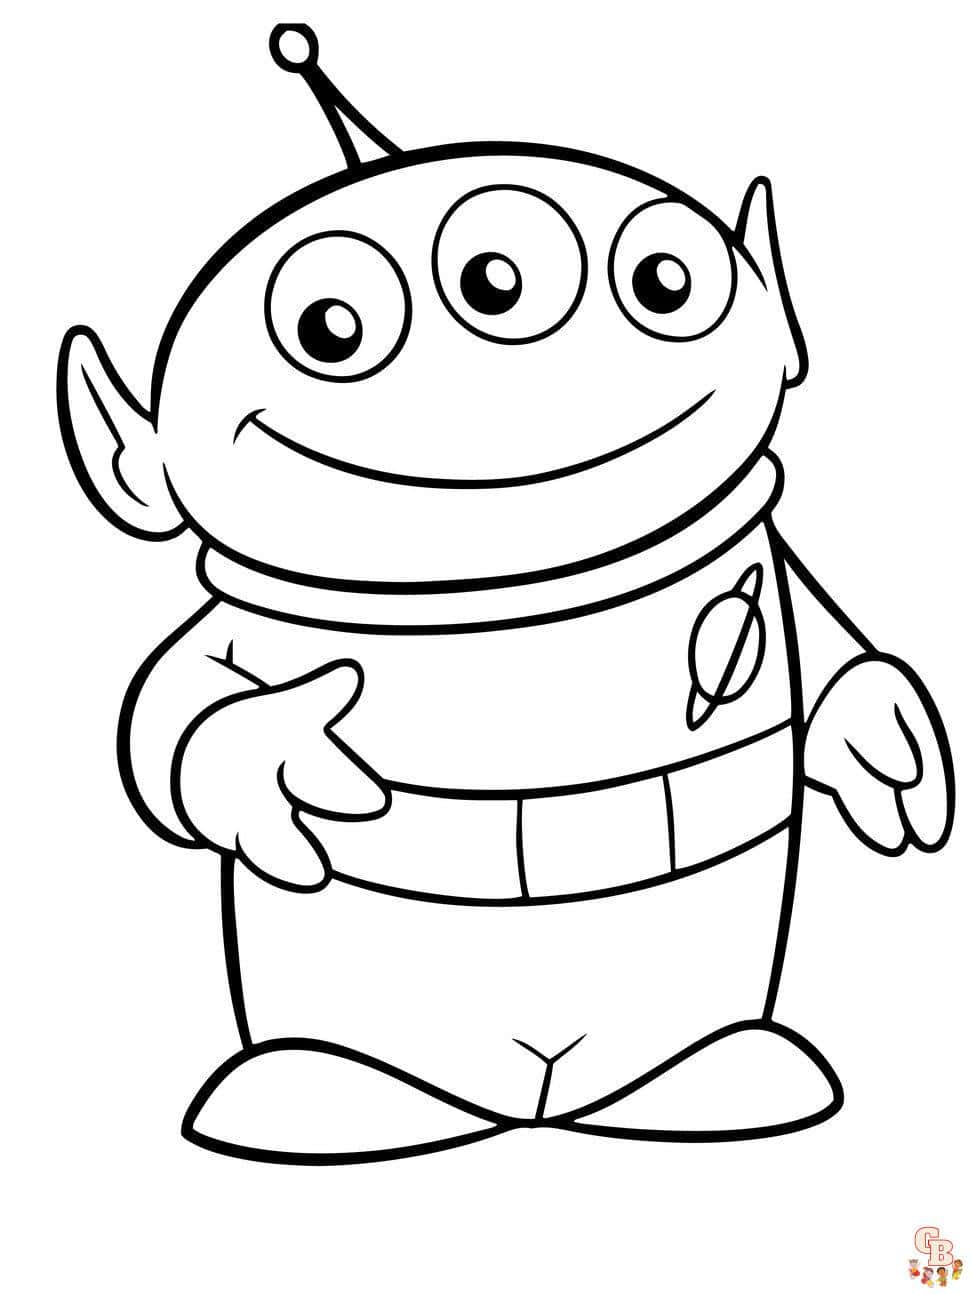 Aliens coloring pages